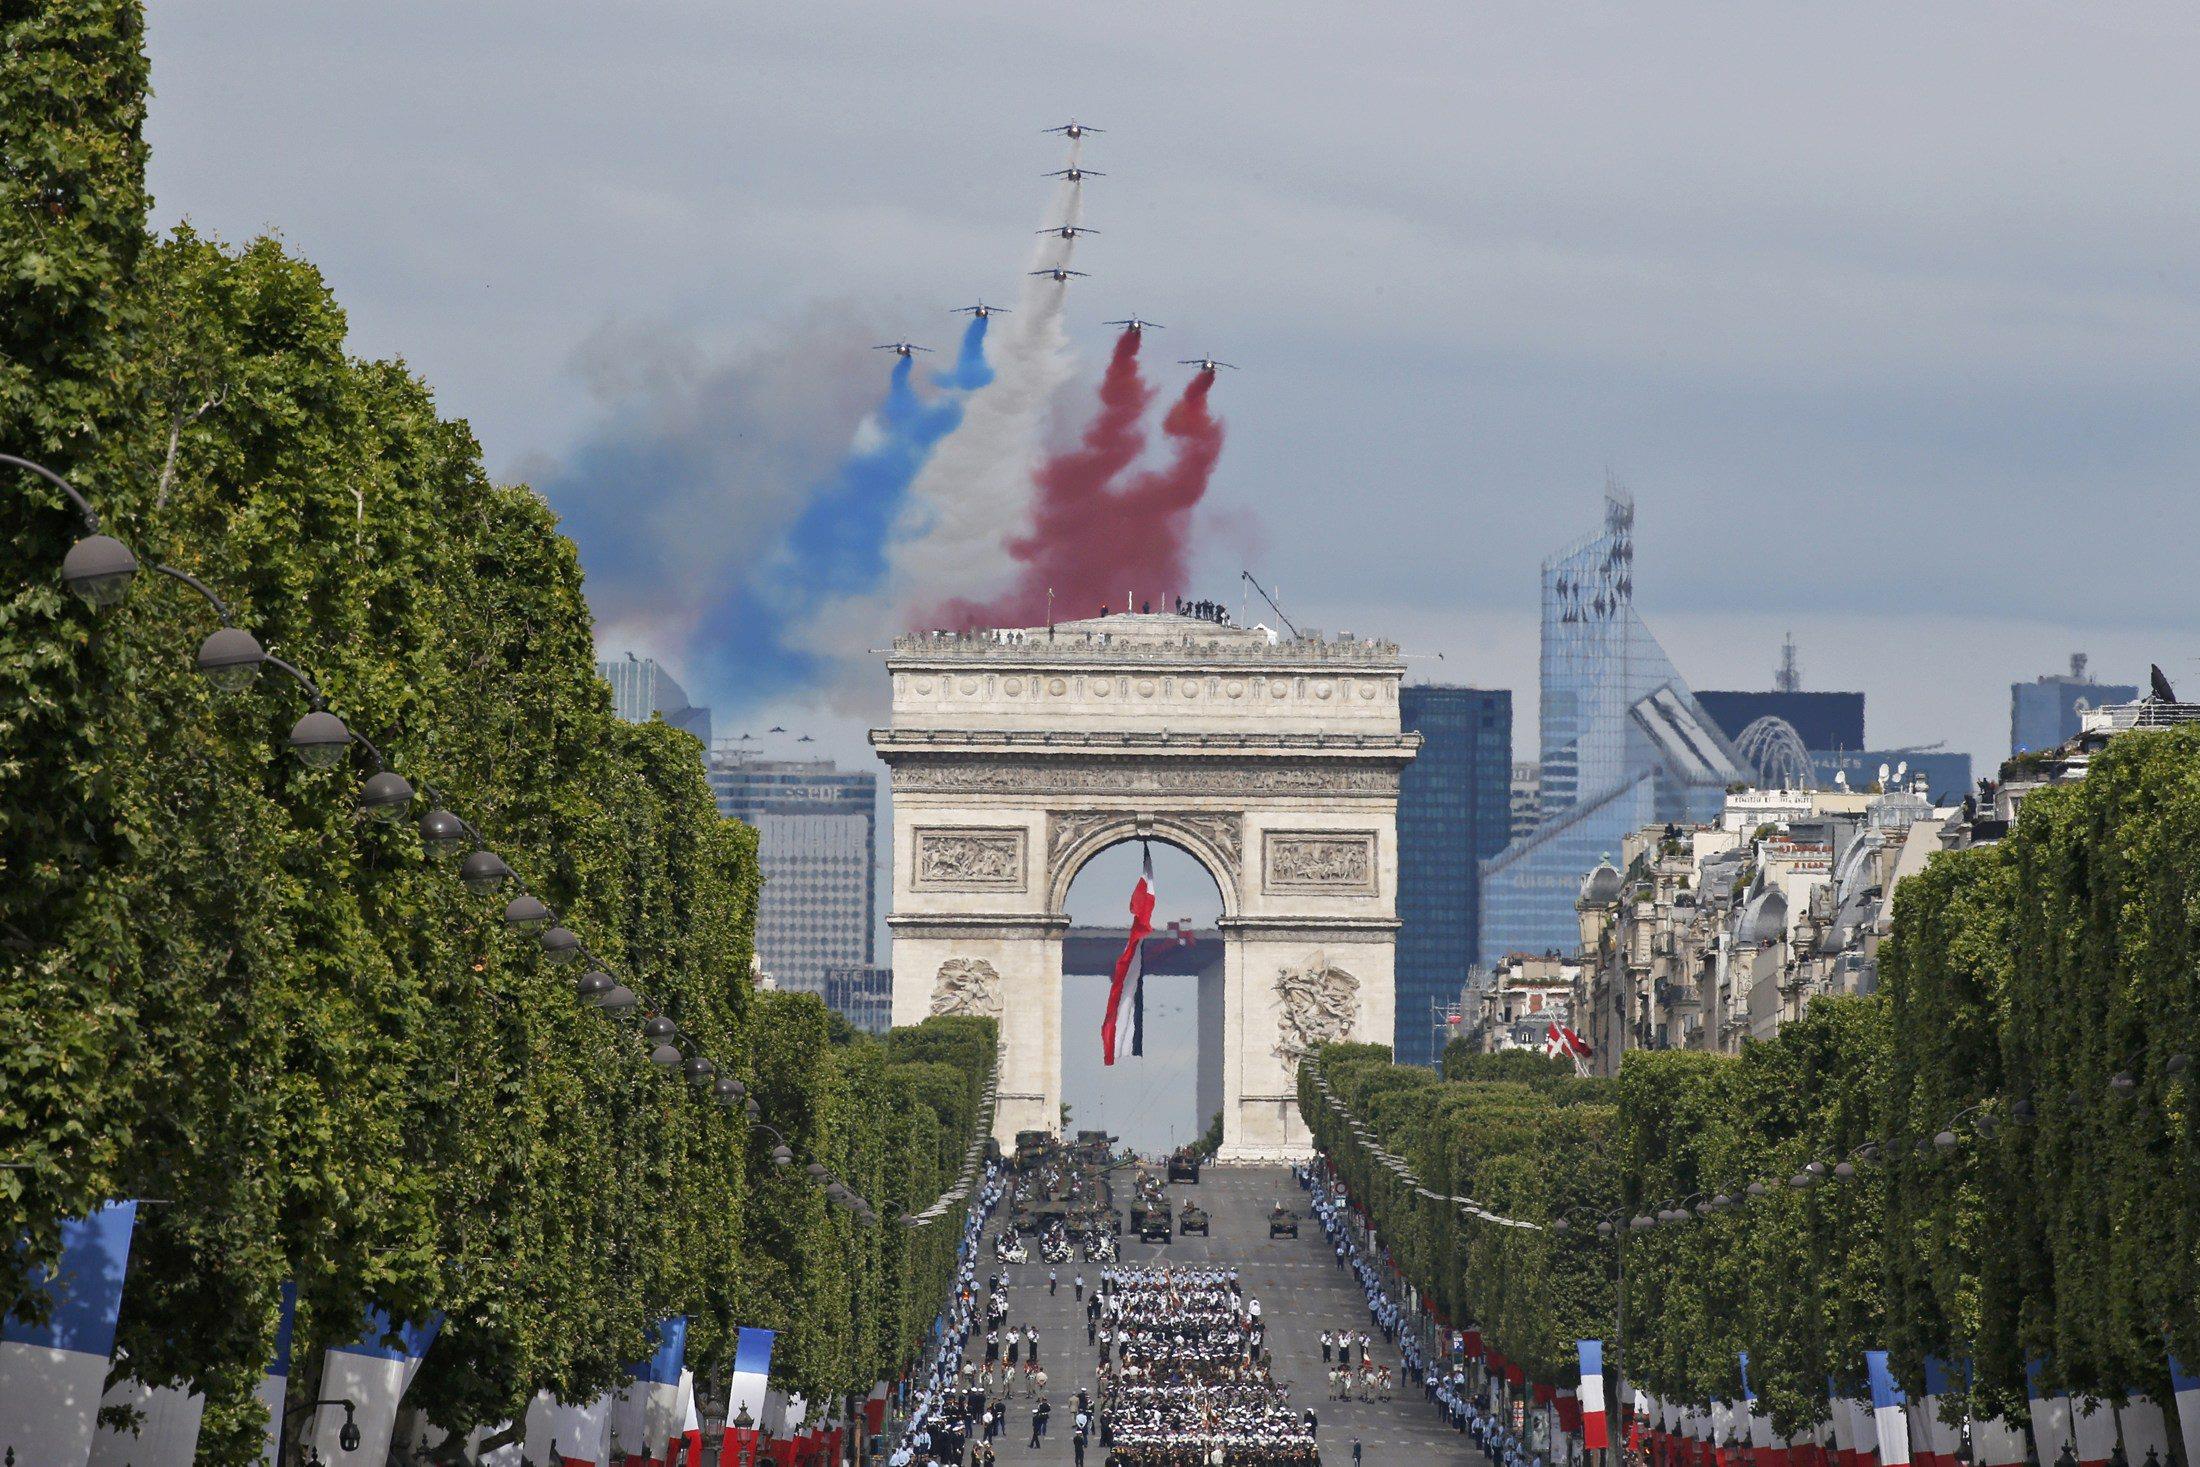 Alpha jets from the Patrouille de France fly in an 'Eiffel Tower' formation over the Champs-Elysees 